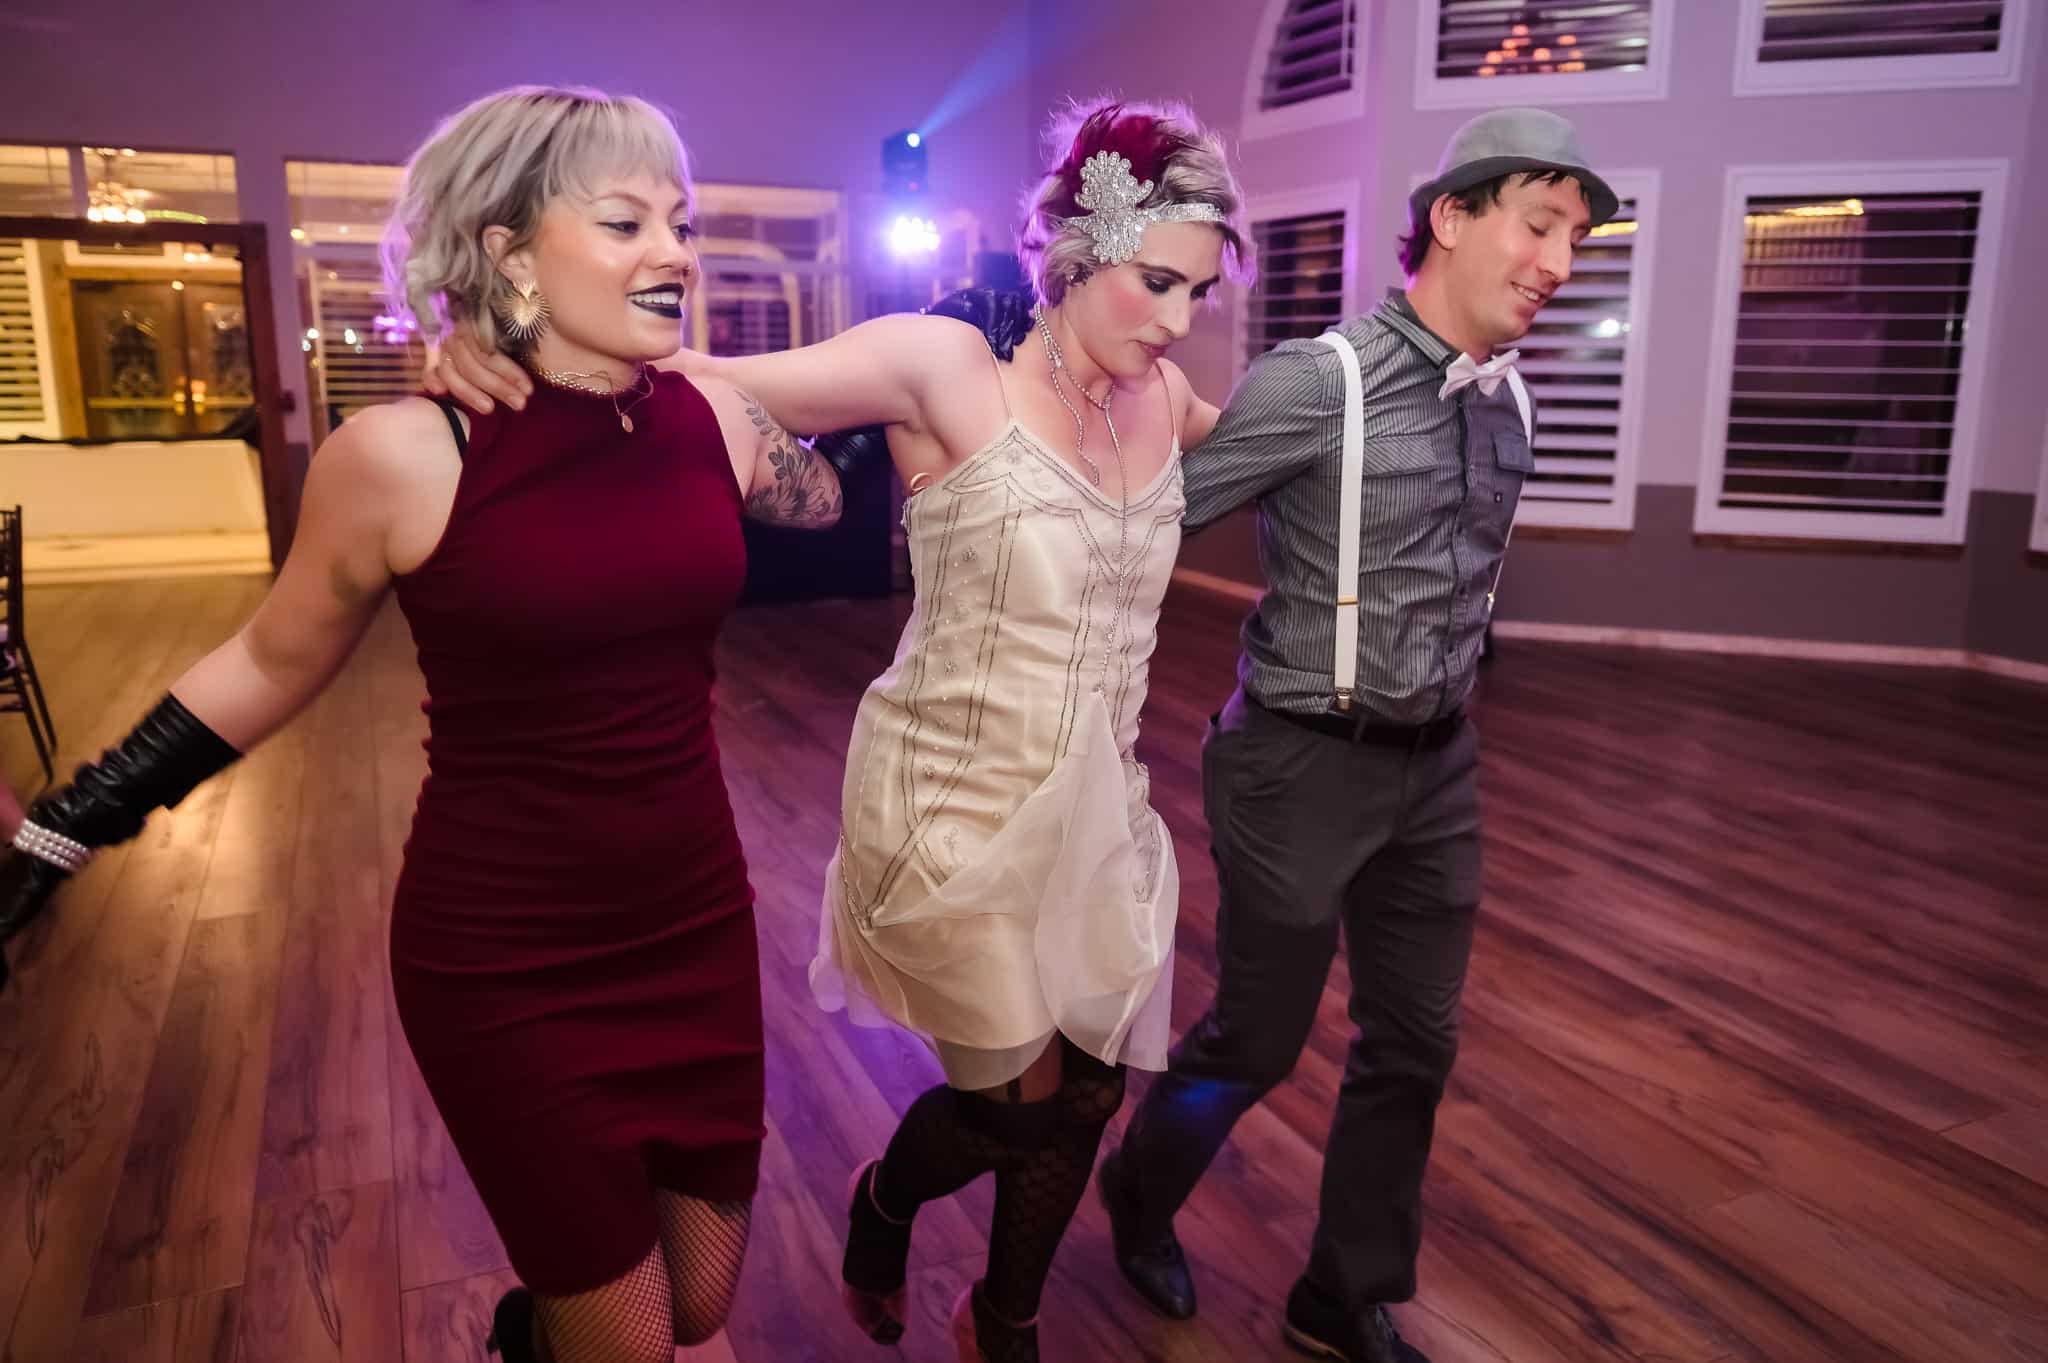 Two woman and a man dressed in 1920s inspired attire link arms and dance in a circle around the specially lighted room to Cotton Eye Joe at a Great Gatsby themed birthday party.